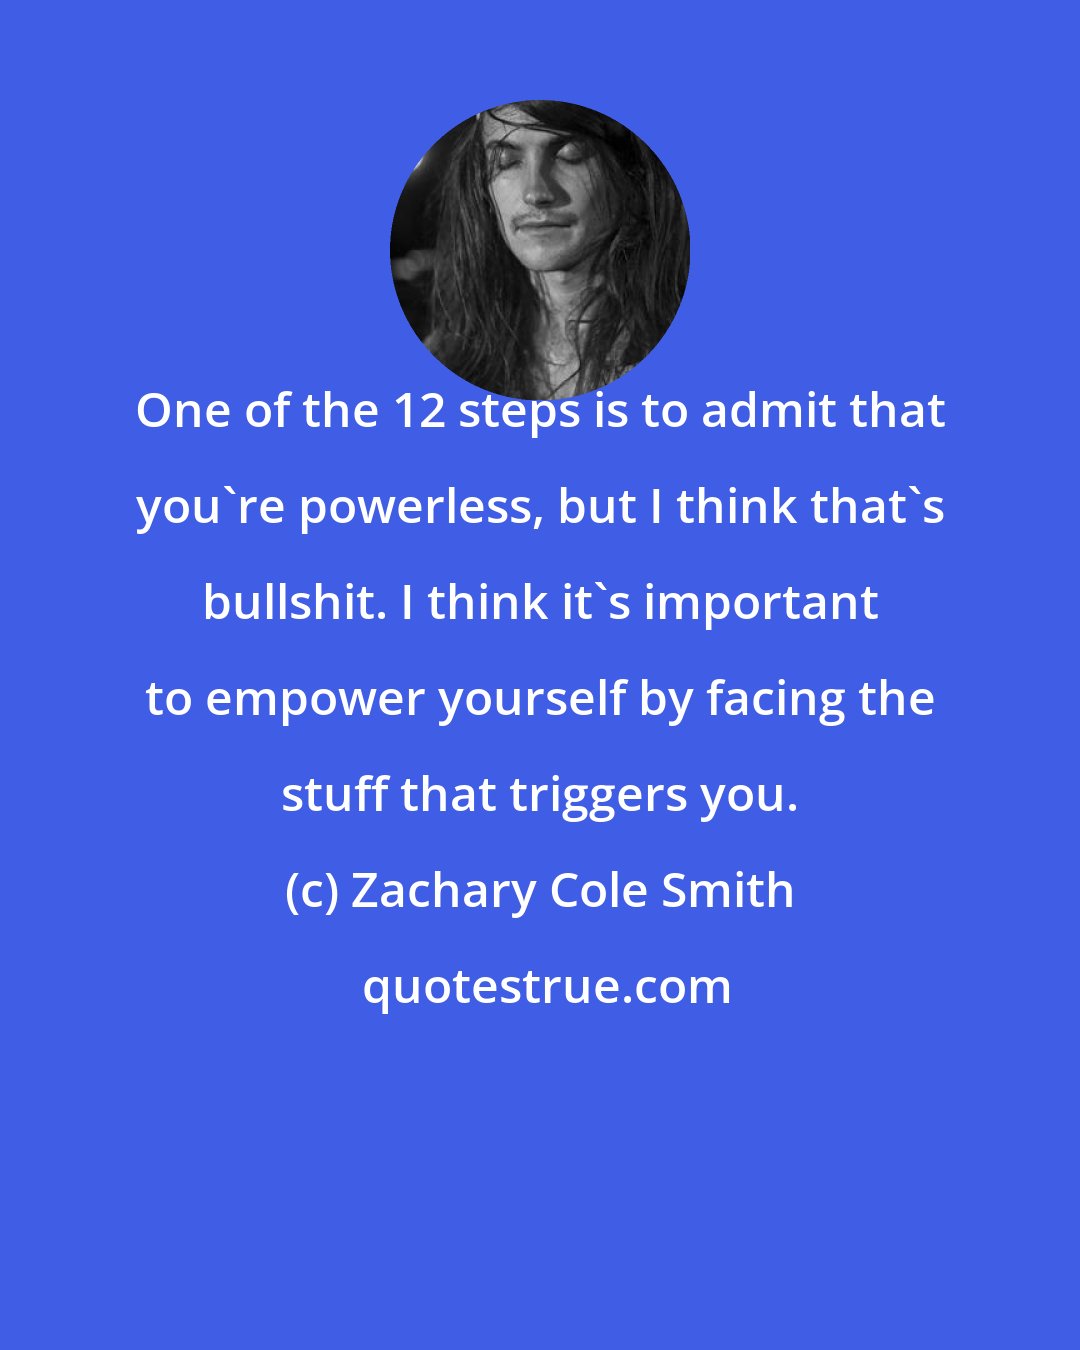 Zachary Cole Smith: One of the 12 steps is to admit that you're powerless, but I think that's bullshit. I think it's important to empower yourself by facing the stuff that triggers you.